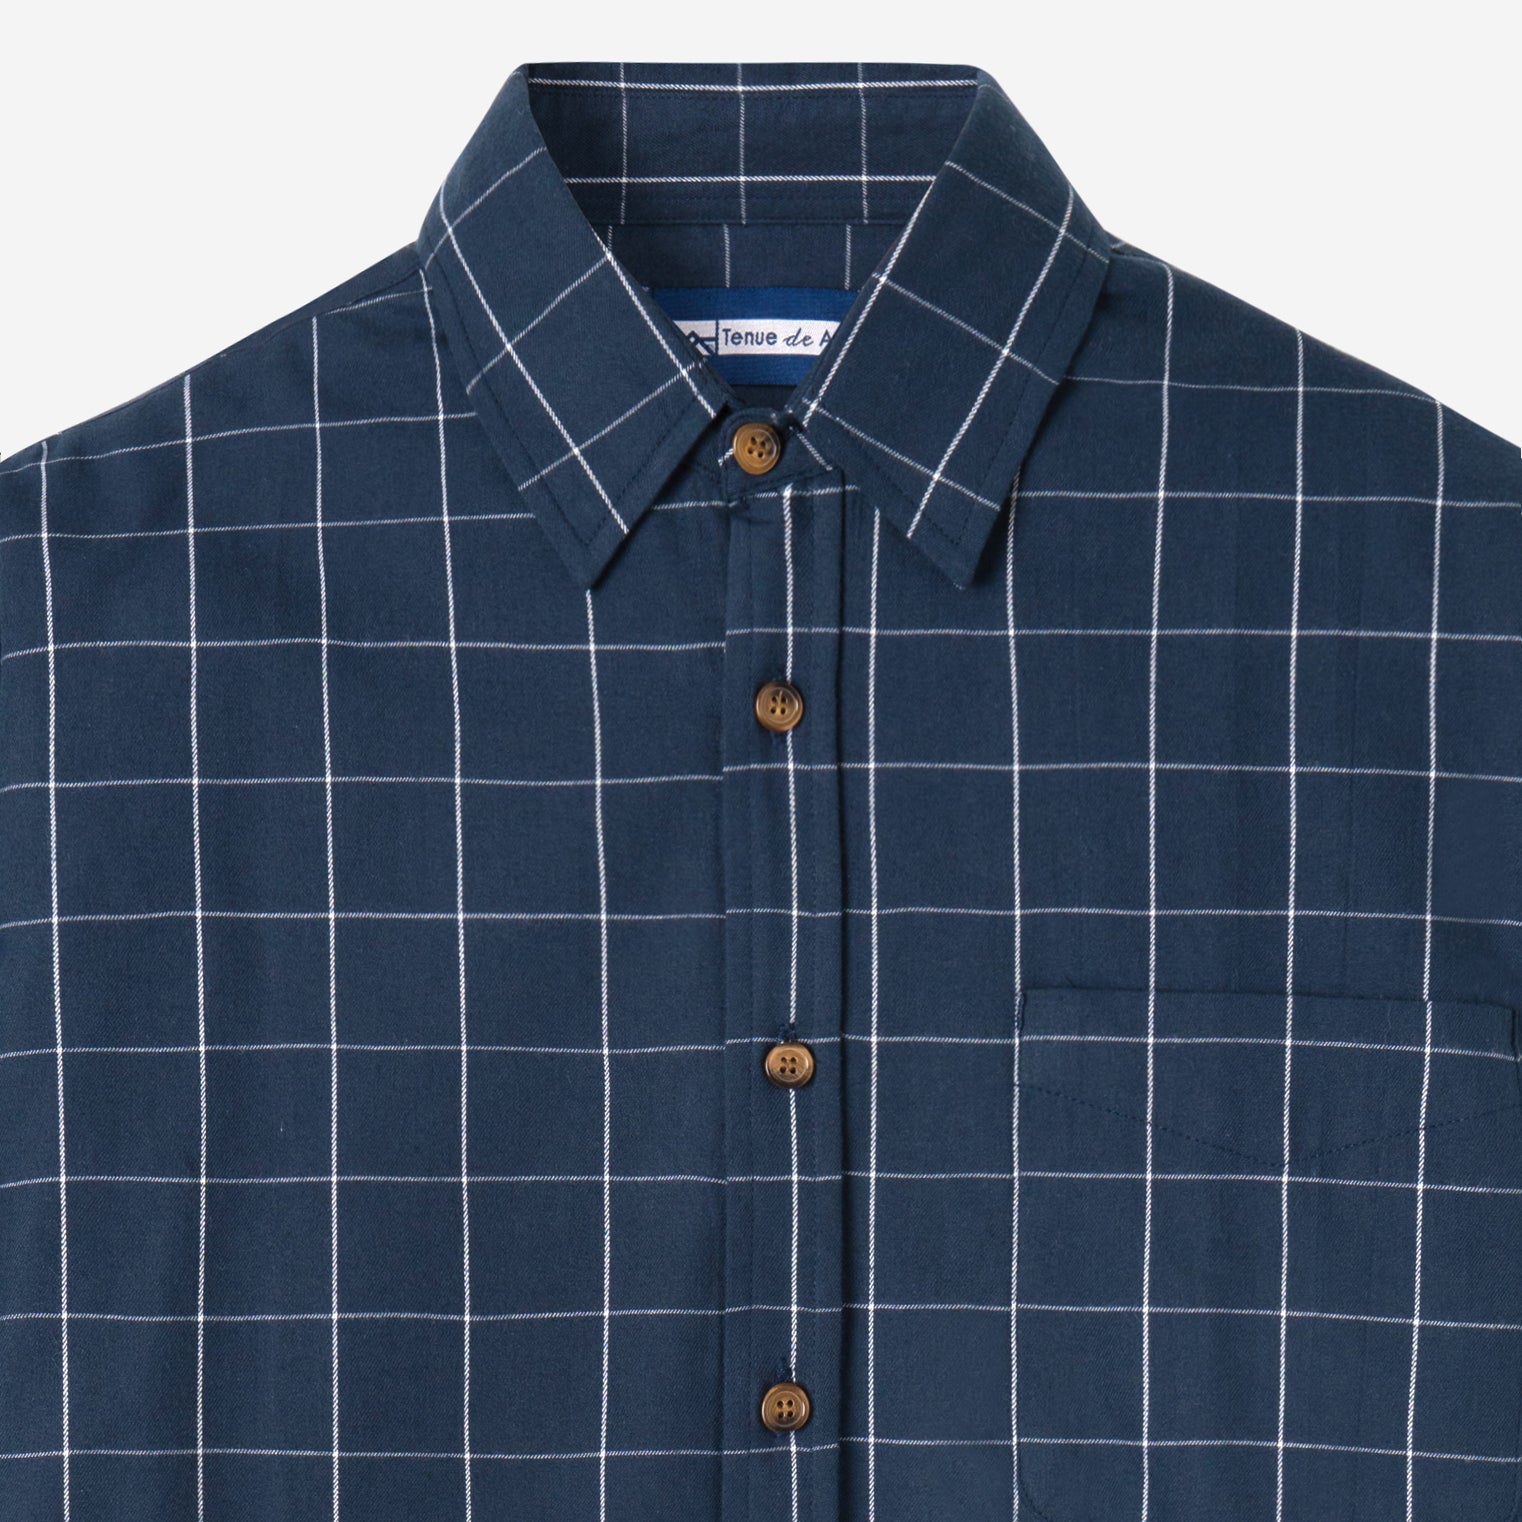 Day to Day Flannel - Navy Square